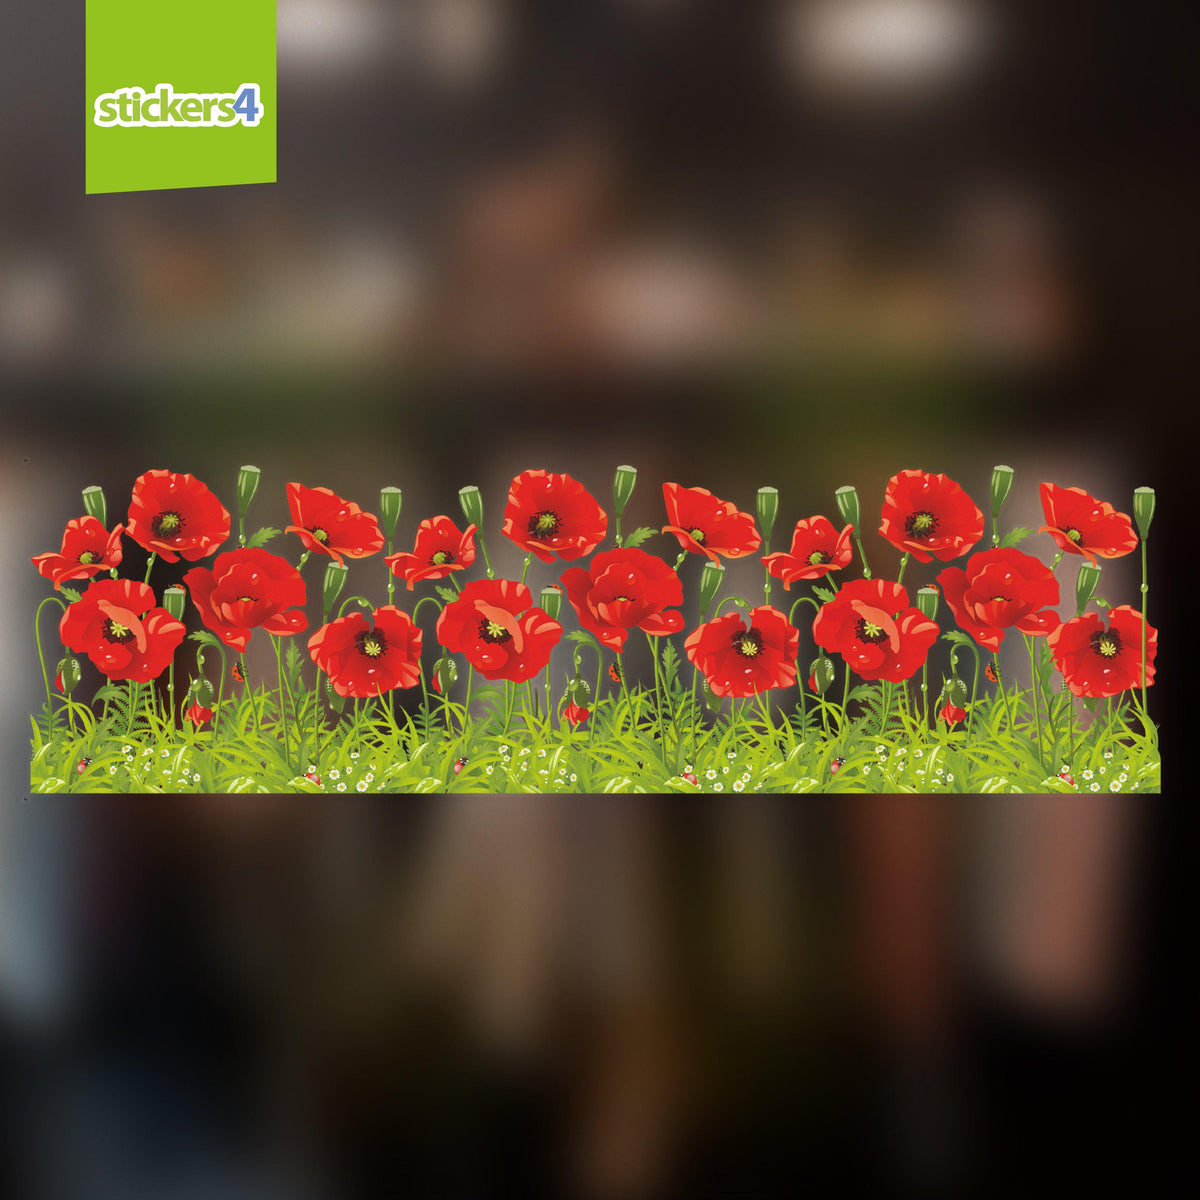 Poppy Border Window Cling Sticker for Shop Window Display Remembrance Window Display